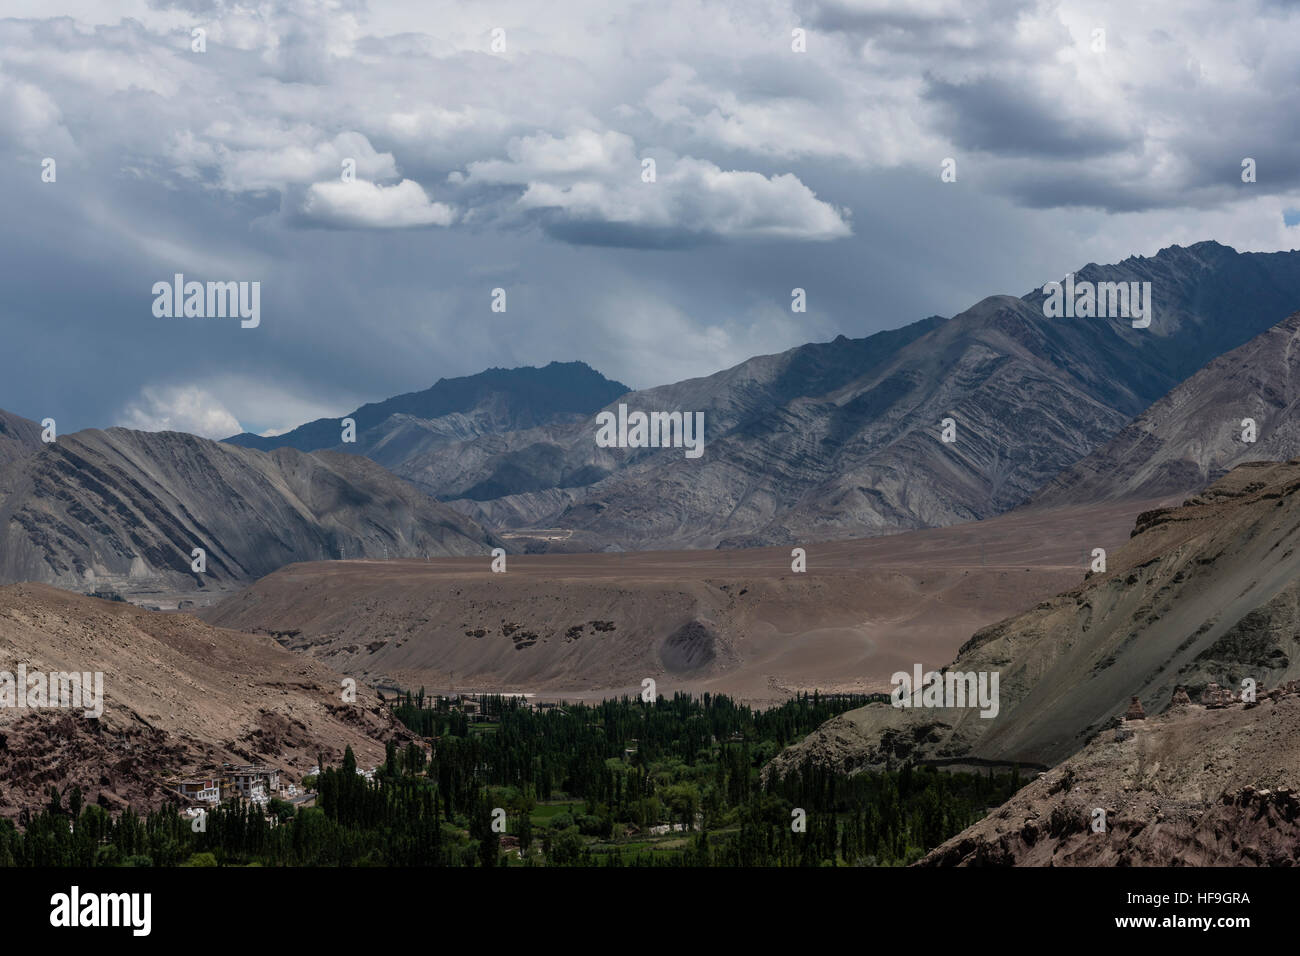 Ladakh landscape showing human settlement and Himalayan mountains in the background Stock Photo